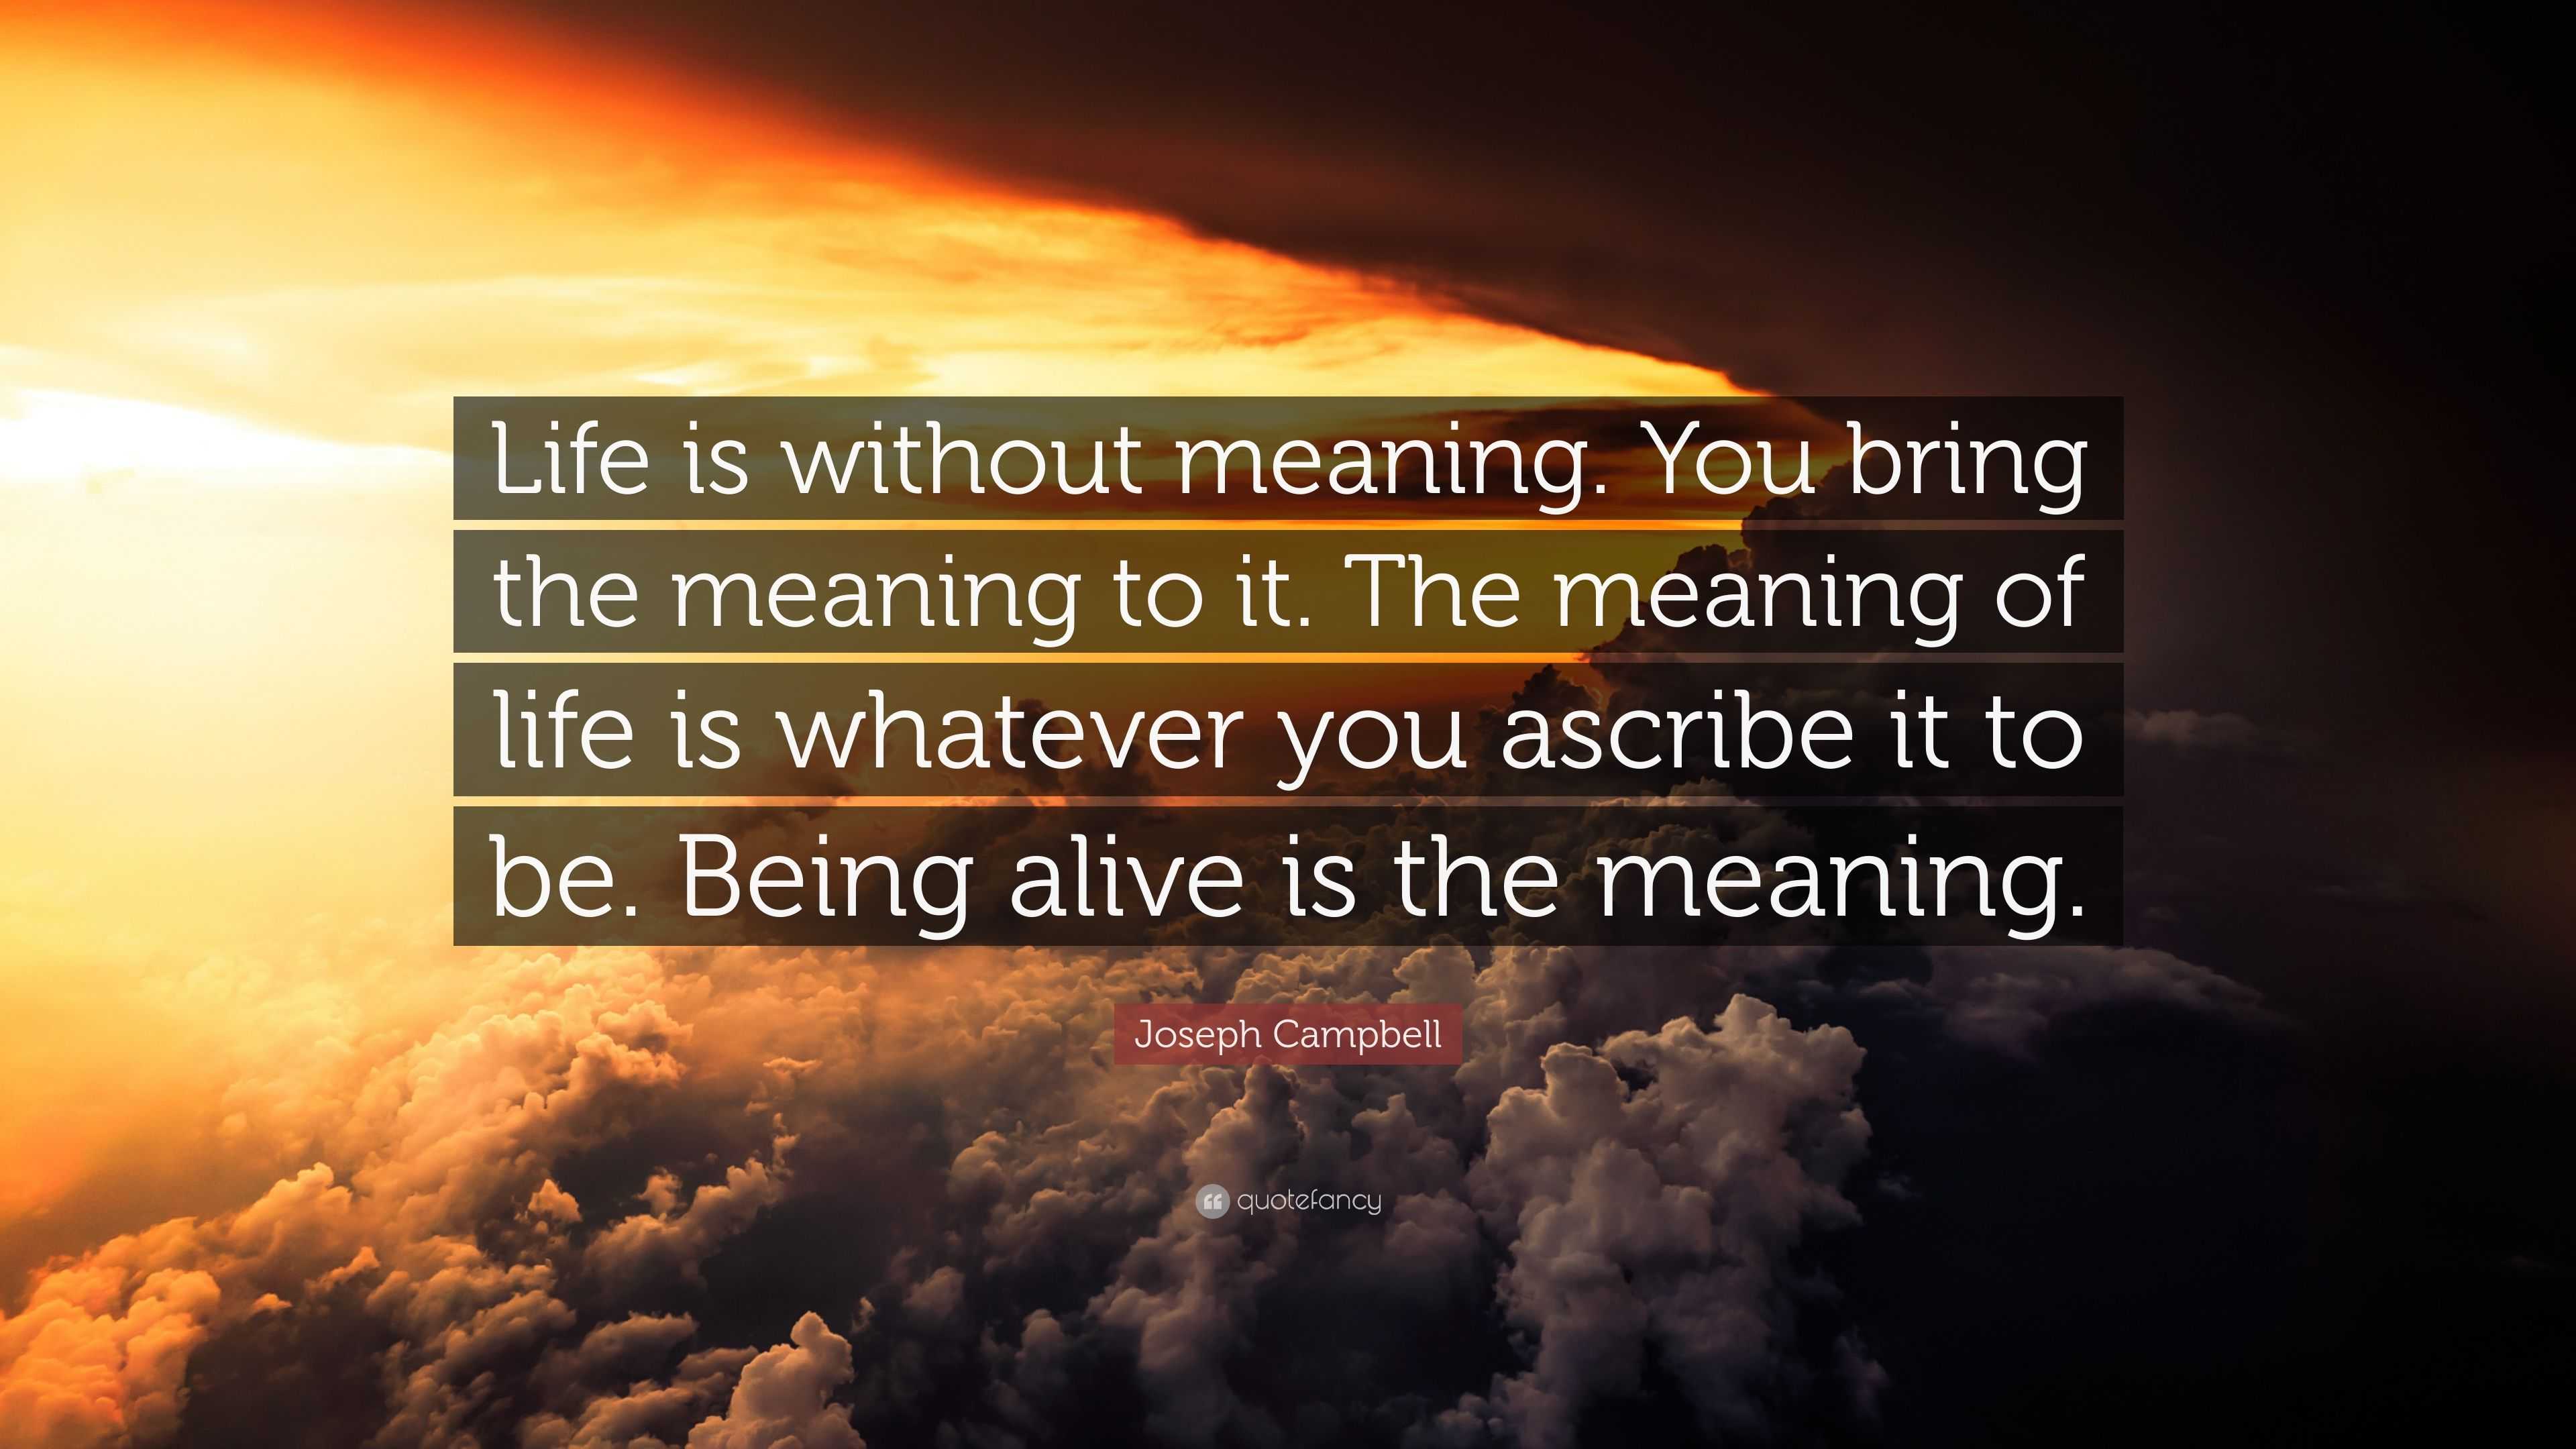 Joseph Campbell Quote: “Life is without meaning. You bring the meaning ...